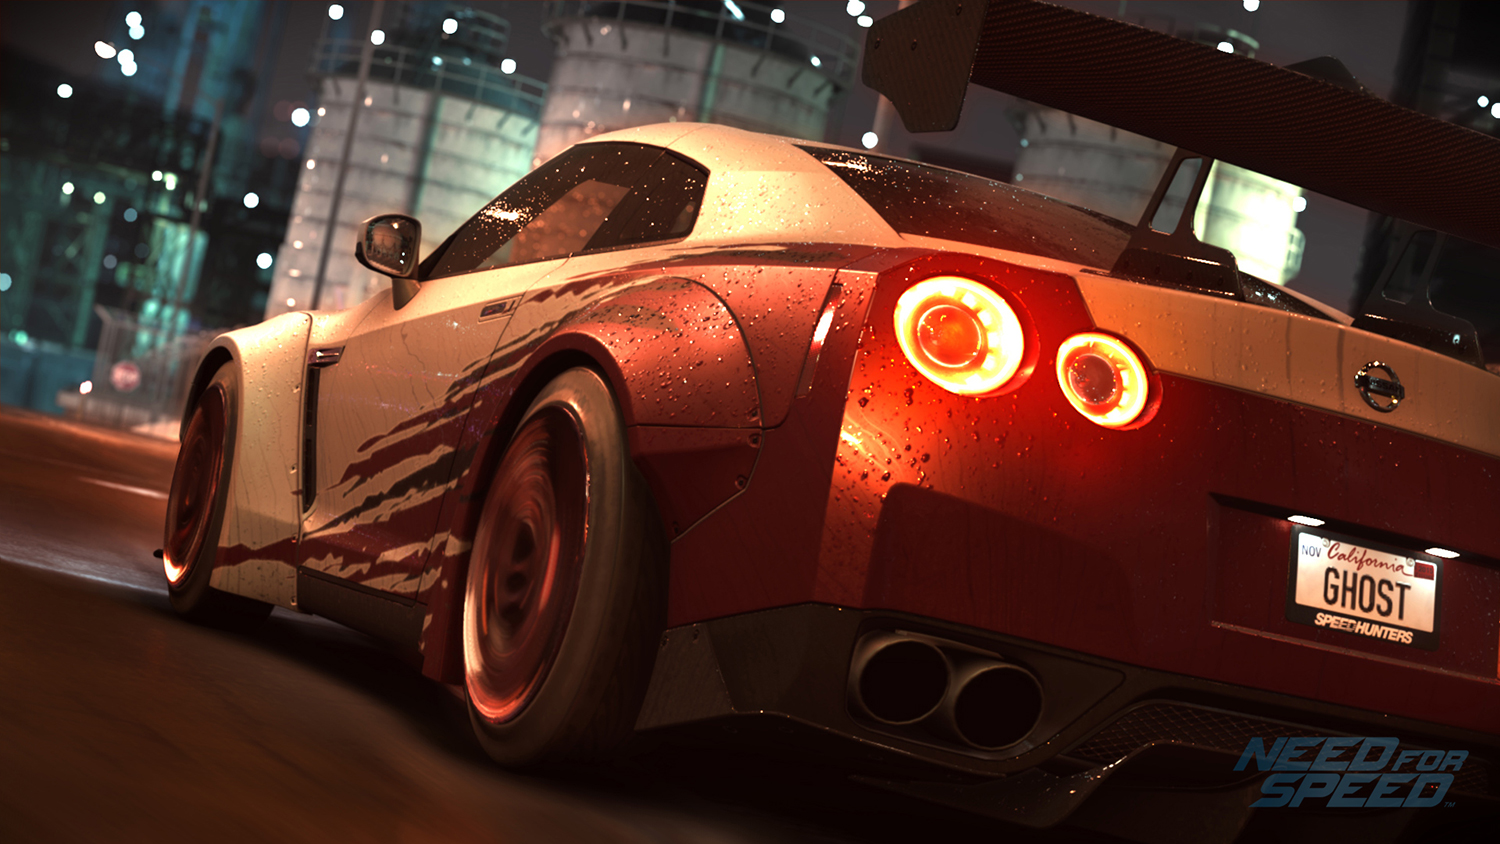 Need For Speed Sequel Confirmed